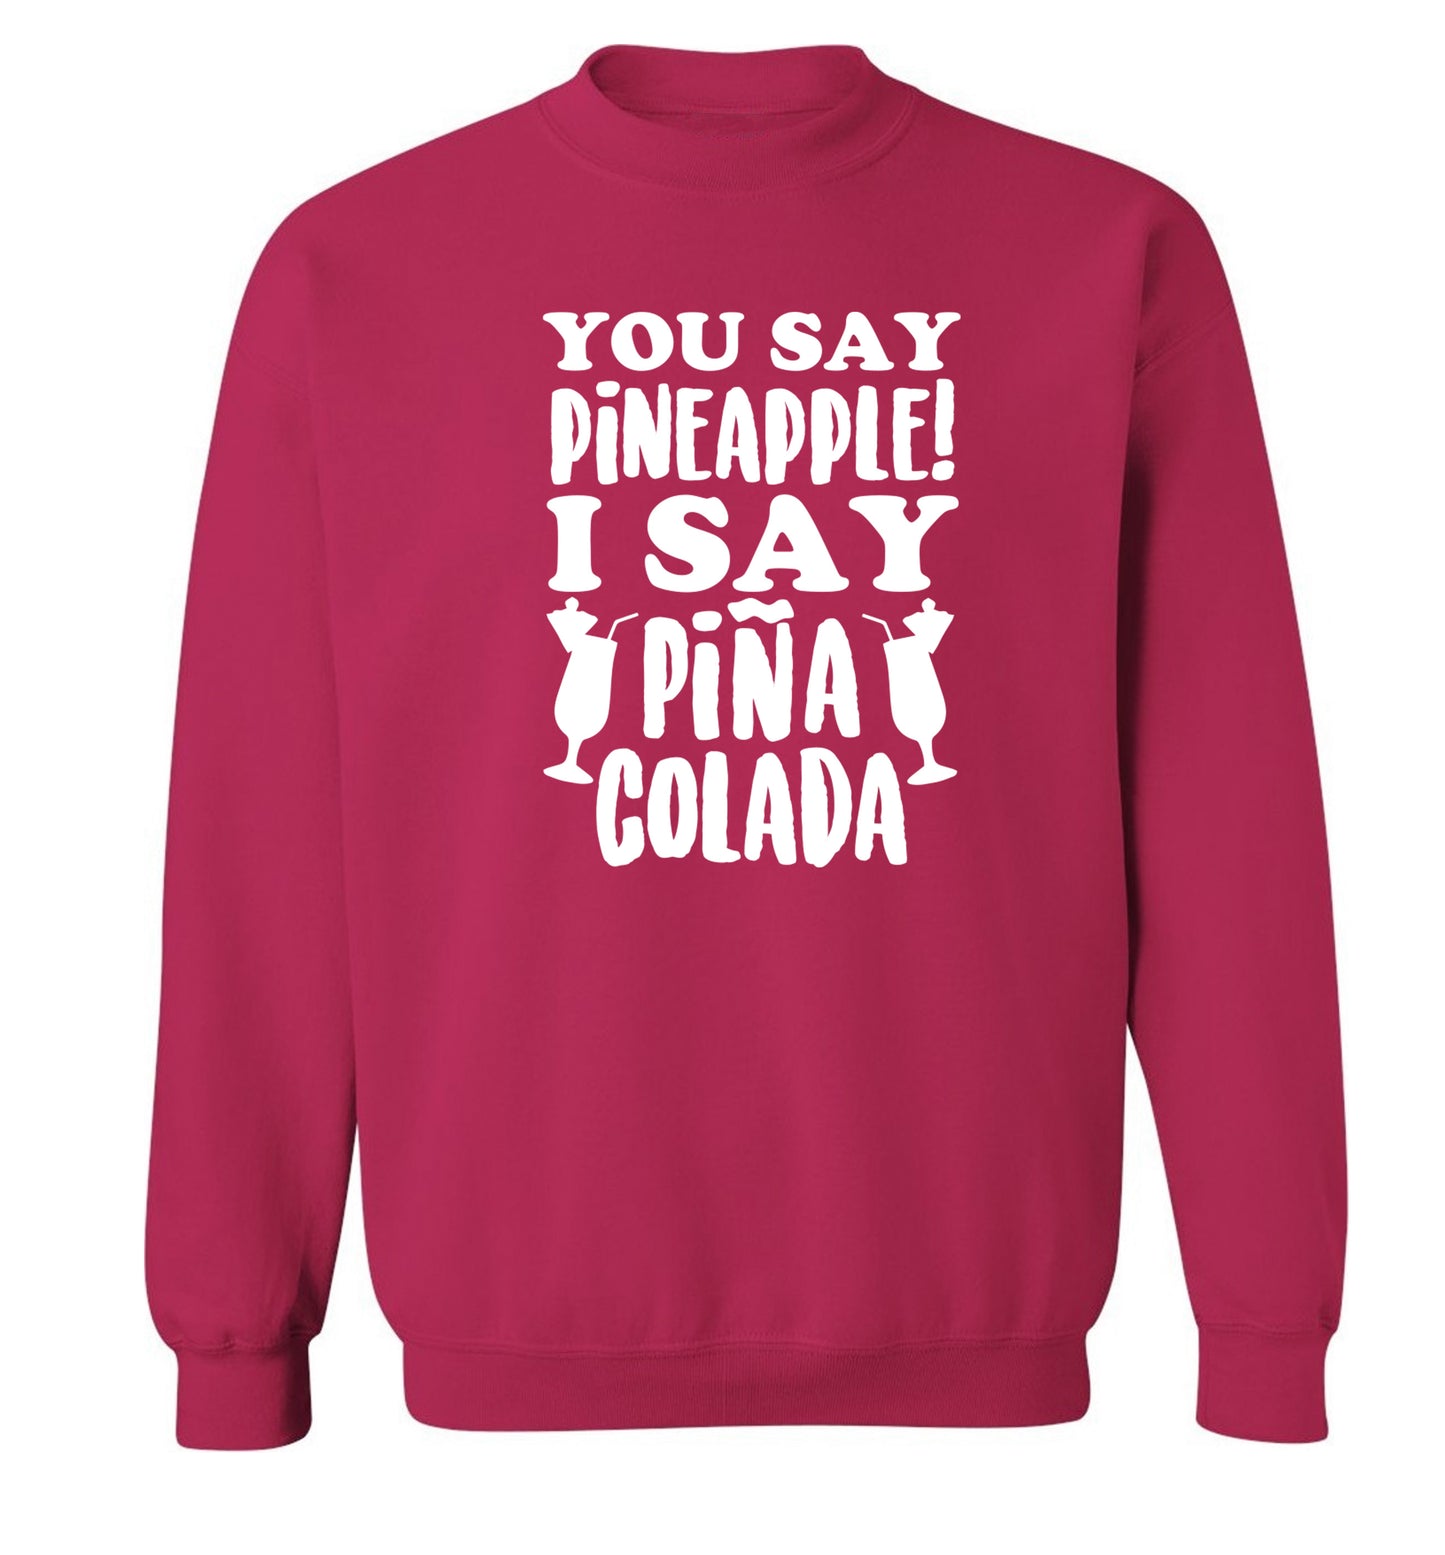 You say pinapple I say Pina colada Adult's unisex pink Sweater 2XL